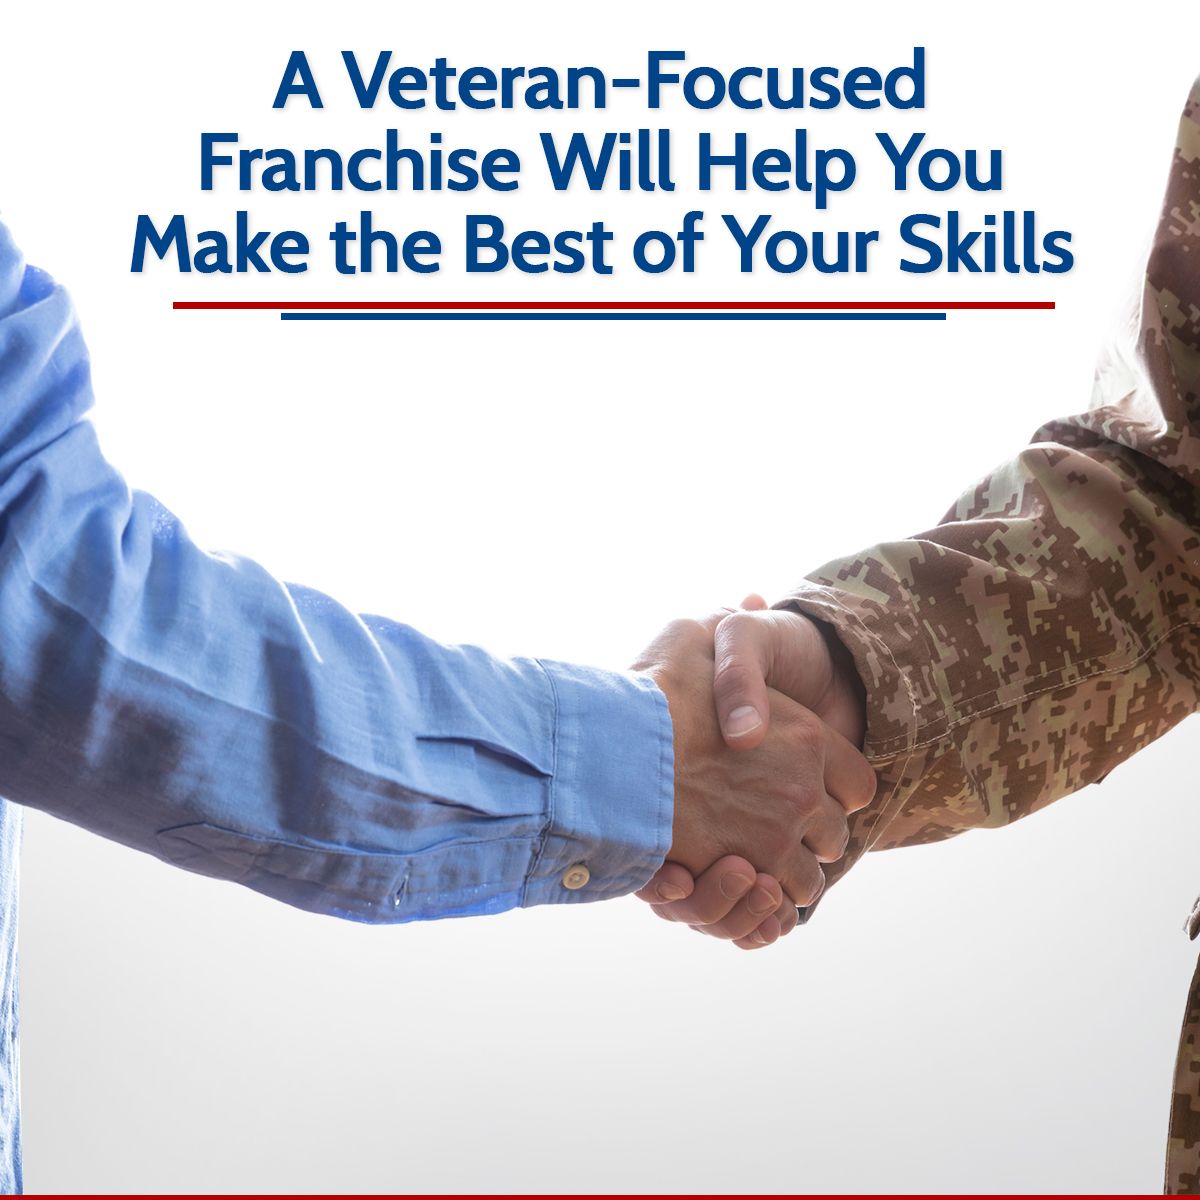 A Veteran-Focused Franchise Will Help You Make the Best of Your Skills